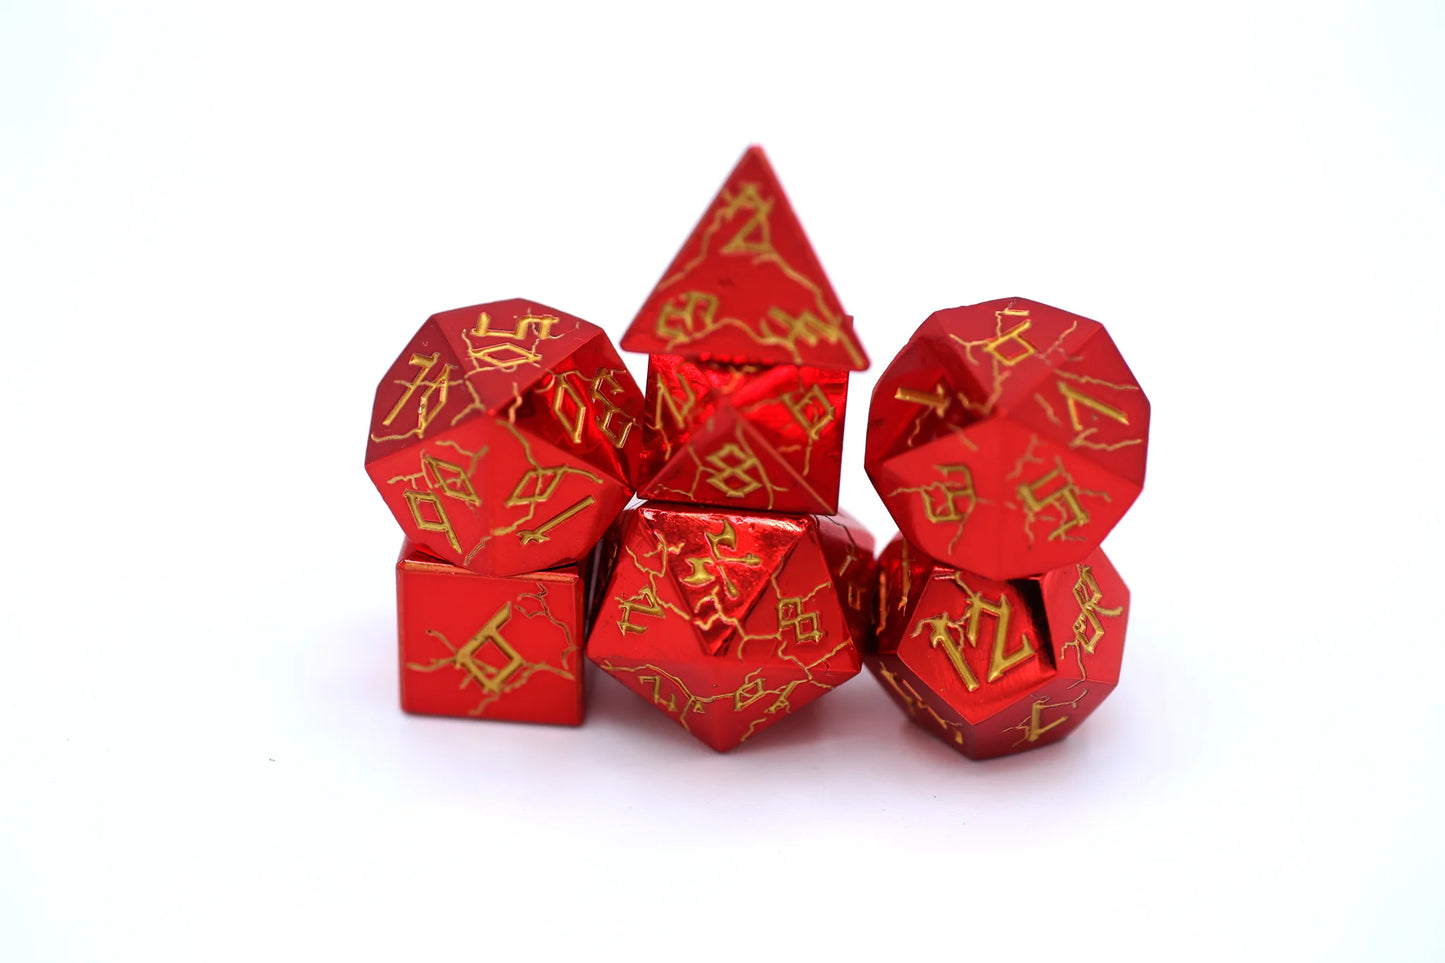 Leyline Dice Set - Red Chrome Solid Metal